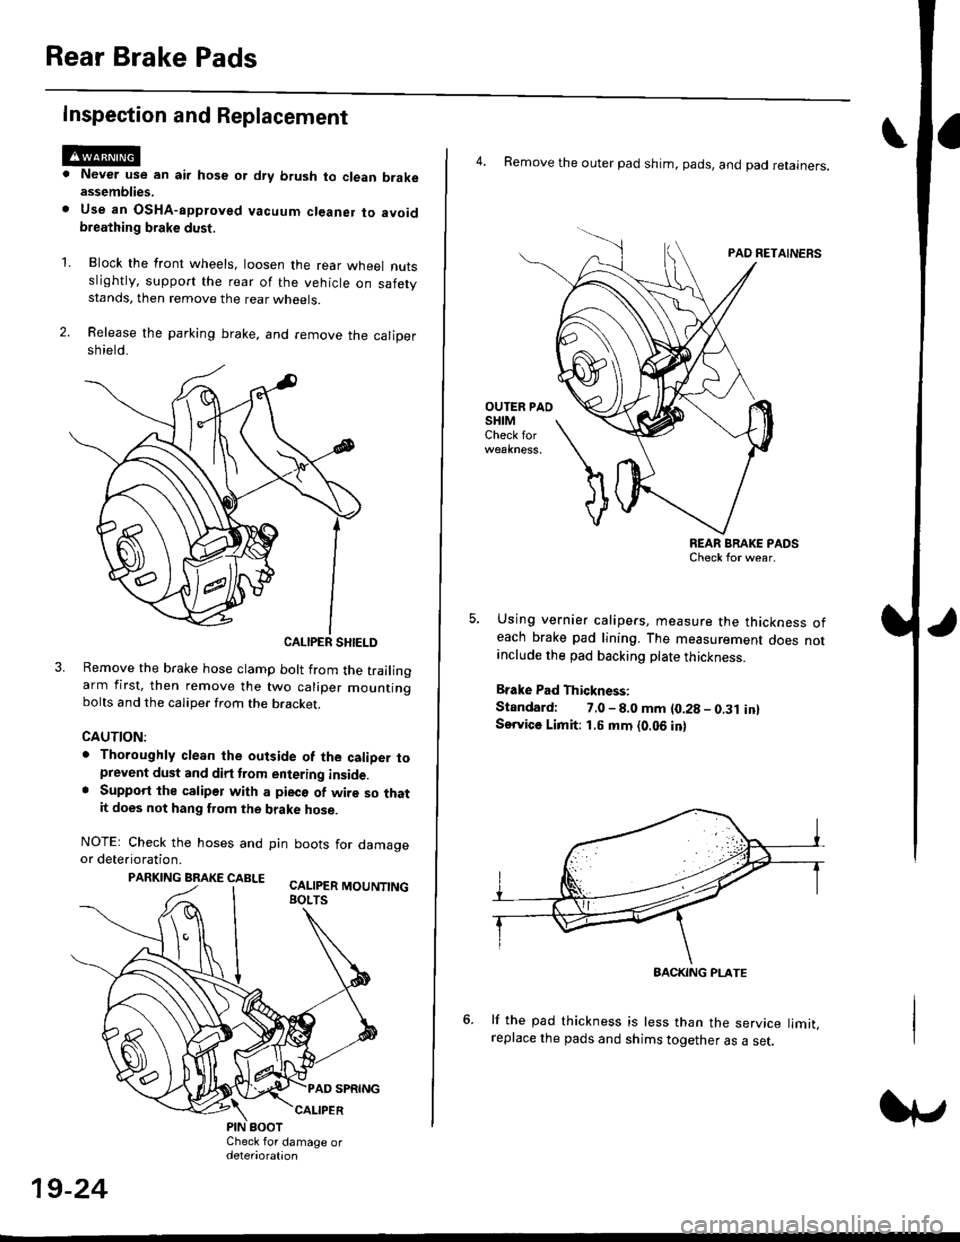 HONDA CIVIC 1999 6.G Workshop Manual Rear Brake Pads
Inspection and Replacement
Never use an air hose or dry brush to clean brakeassemblies.
Use an OsHA-apptoved vacuum cl€aner to avoidbreathing brake dust,
Block the front wheels, loos